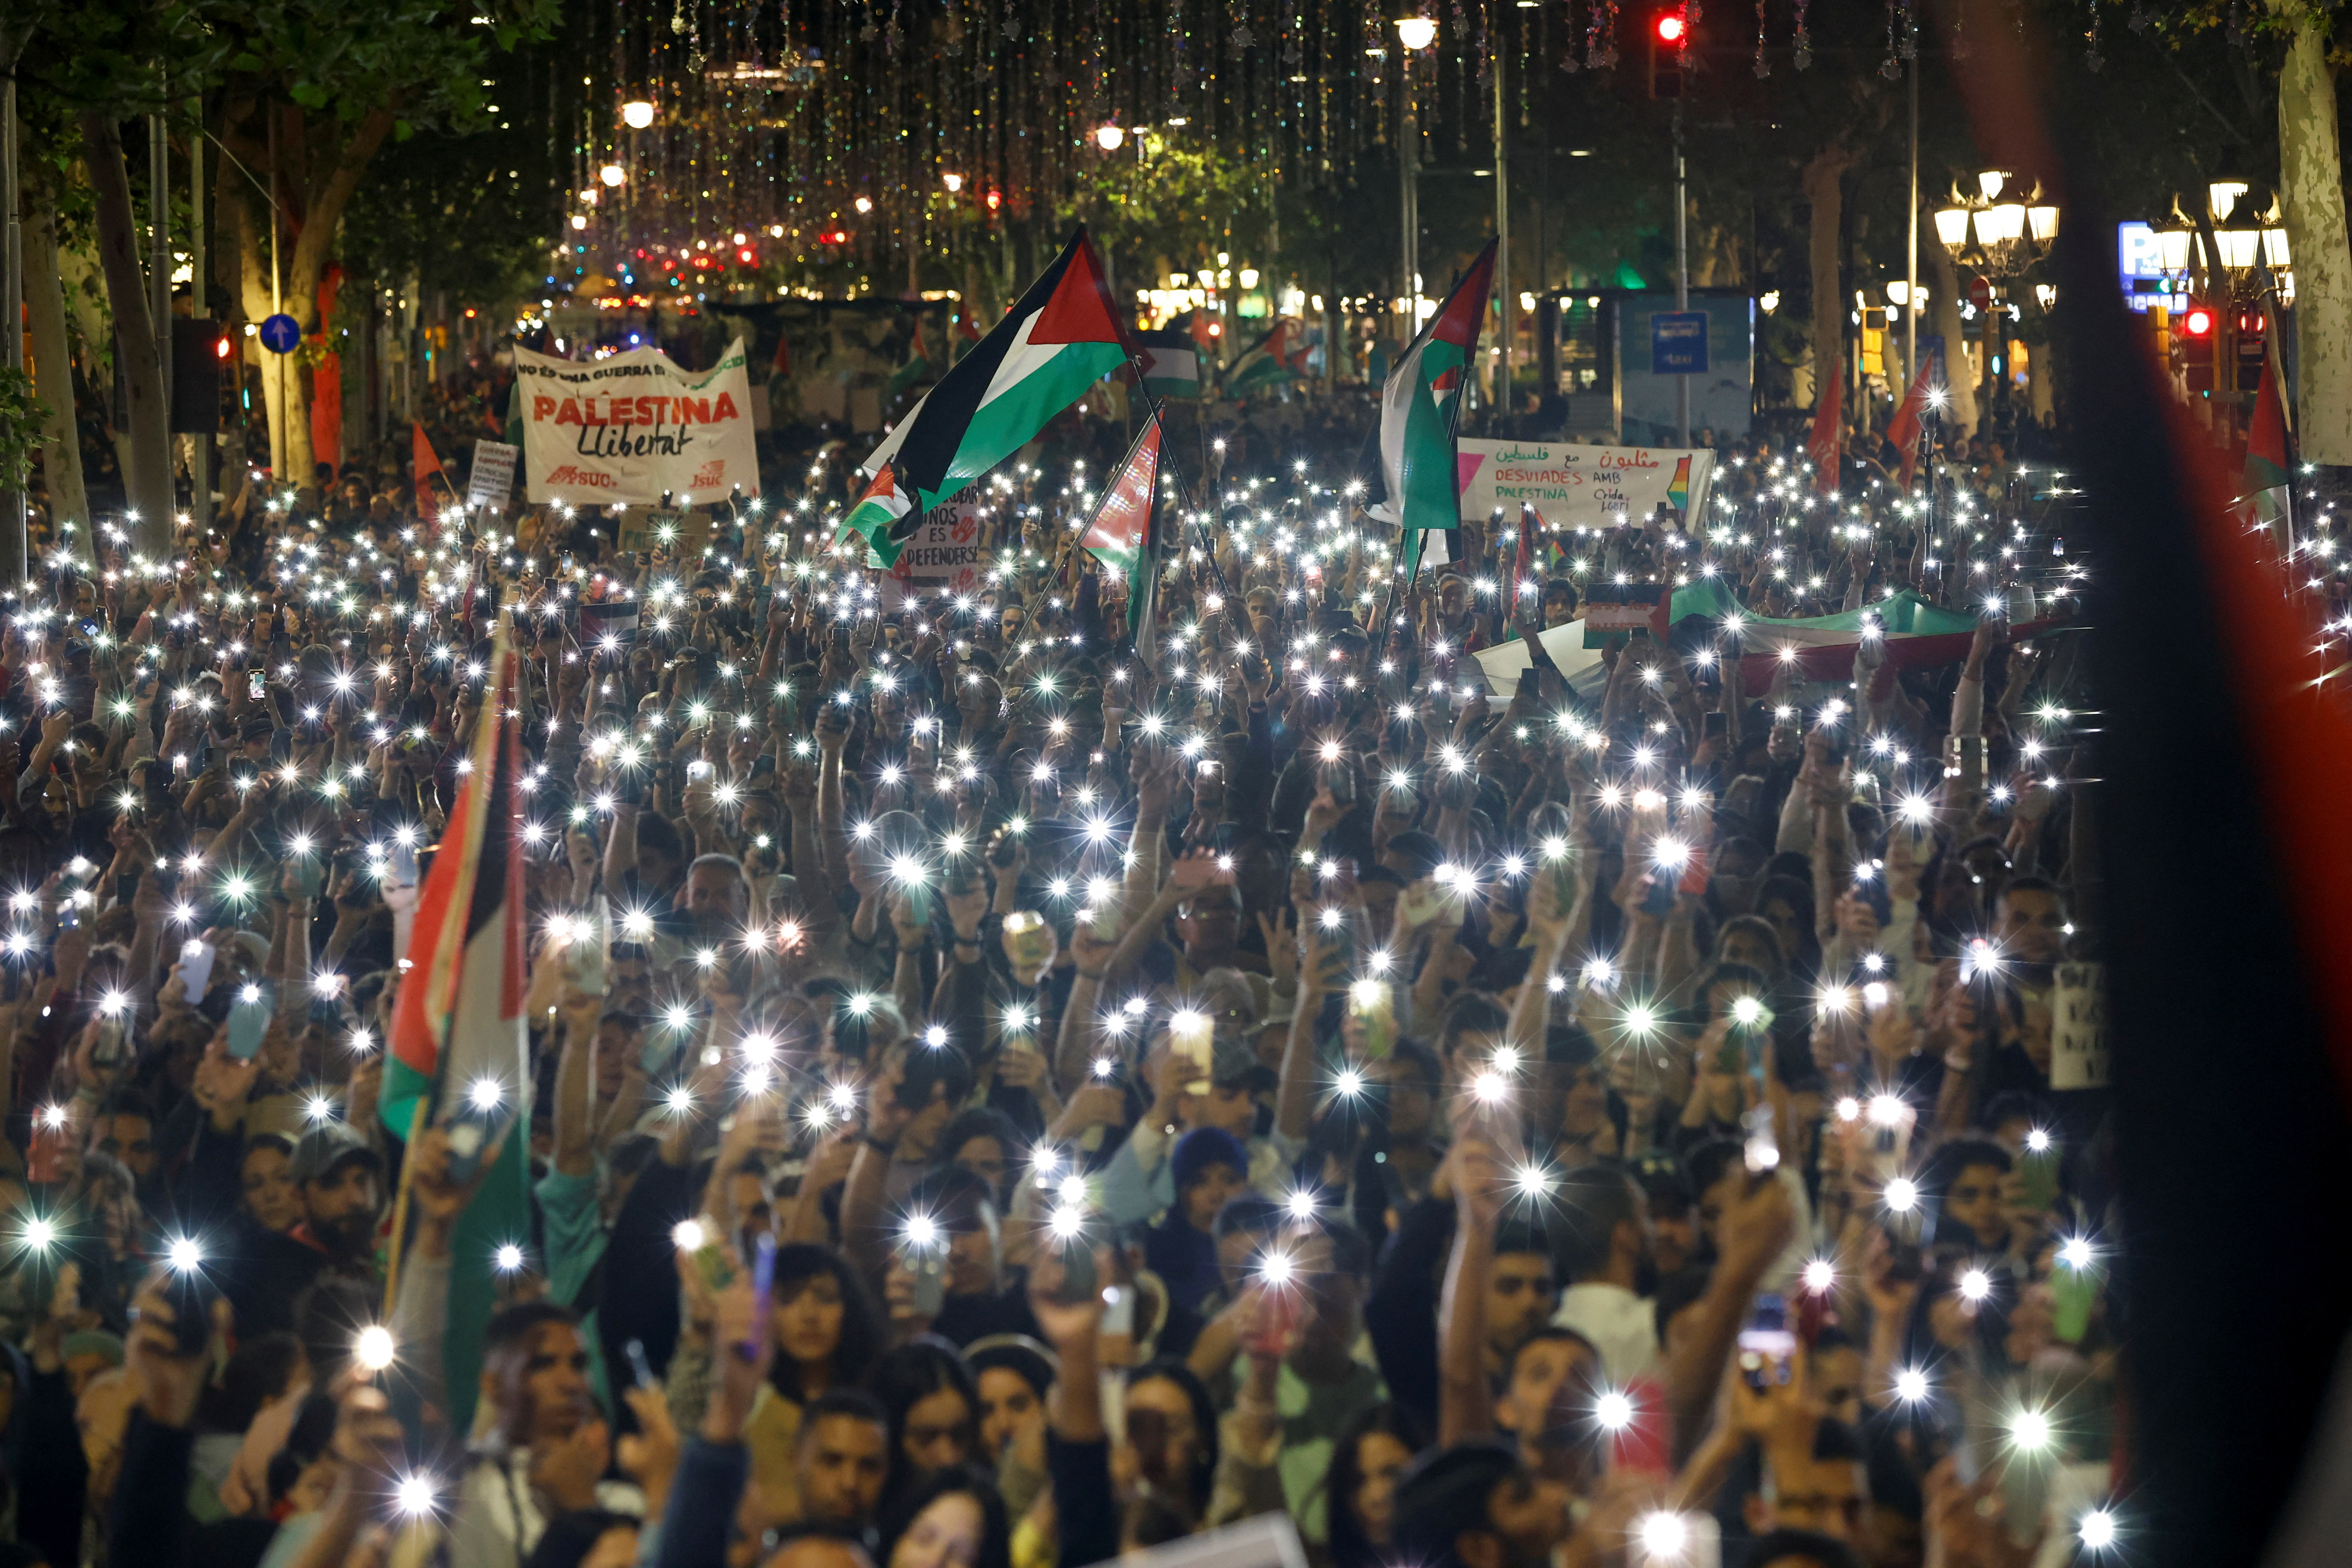 Members of the Palestinian community participate in a demonstration in Barcelona